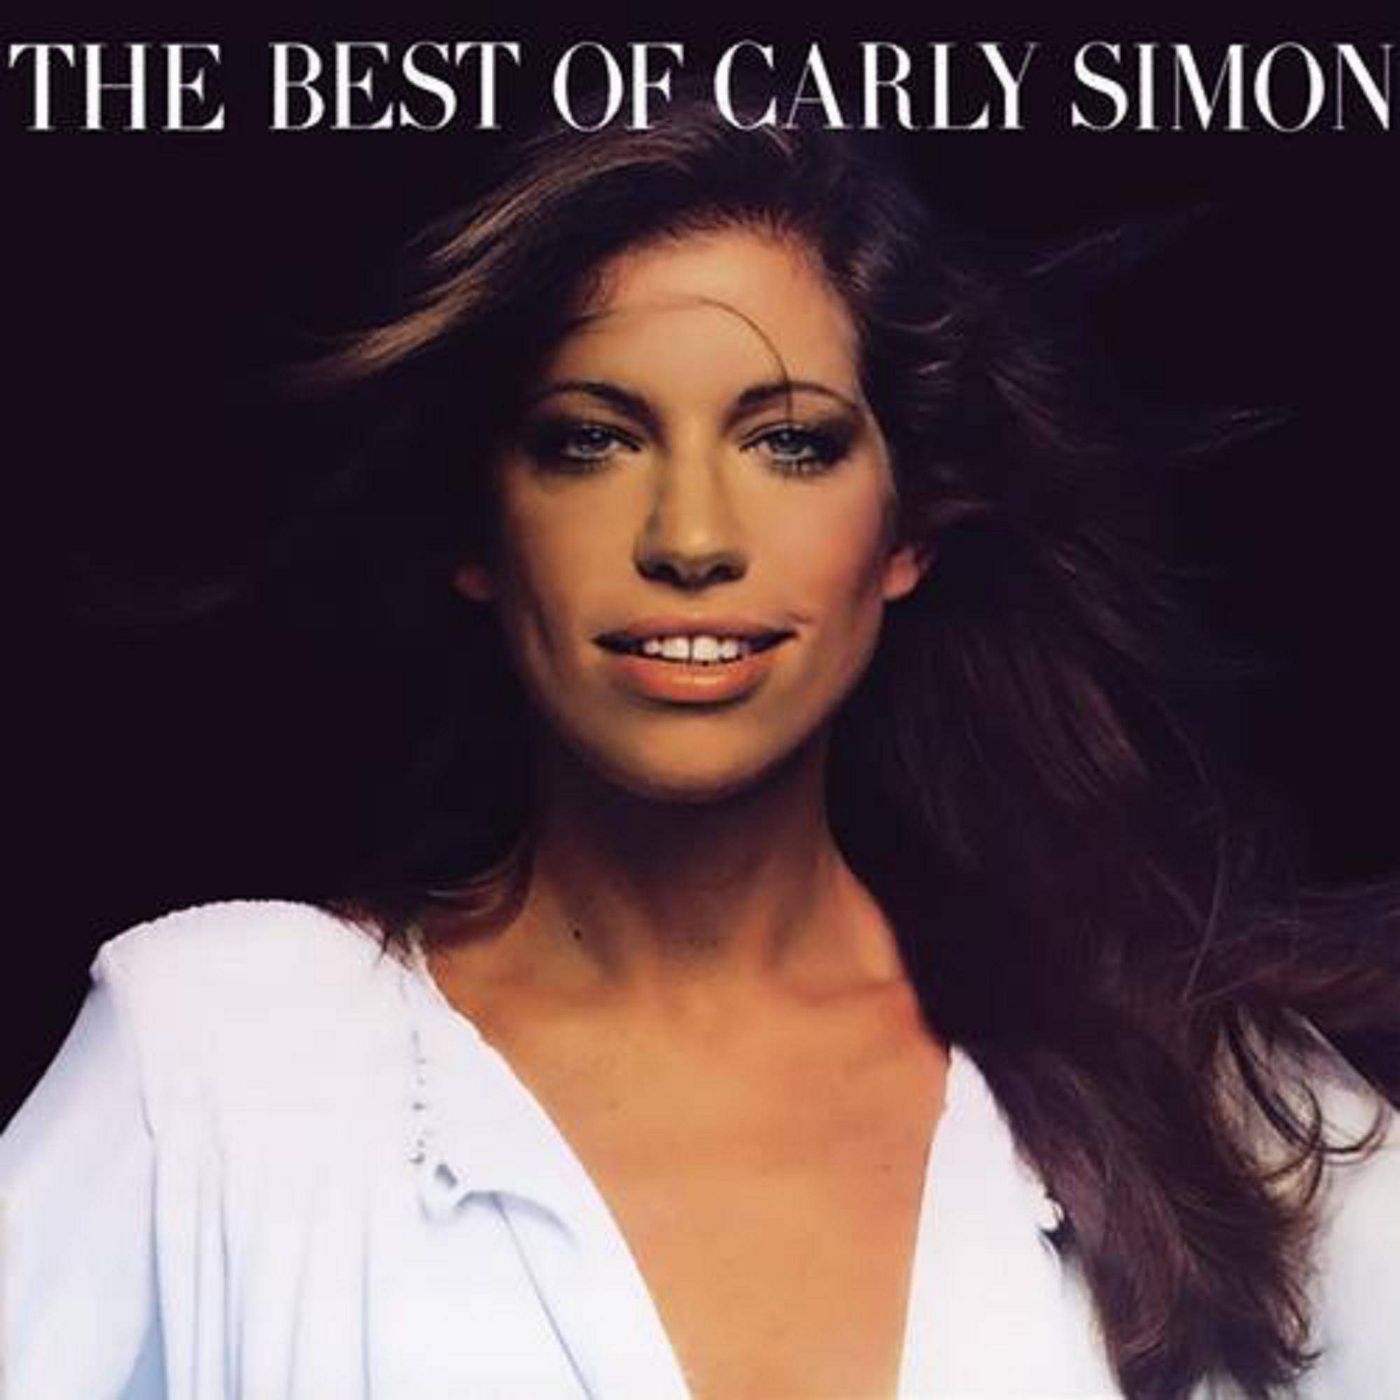 CARLY SIMON 'THE BEST OF CARLY SIMON' CD